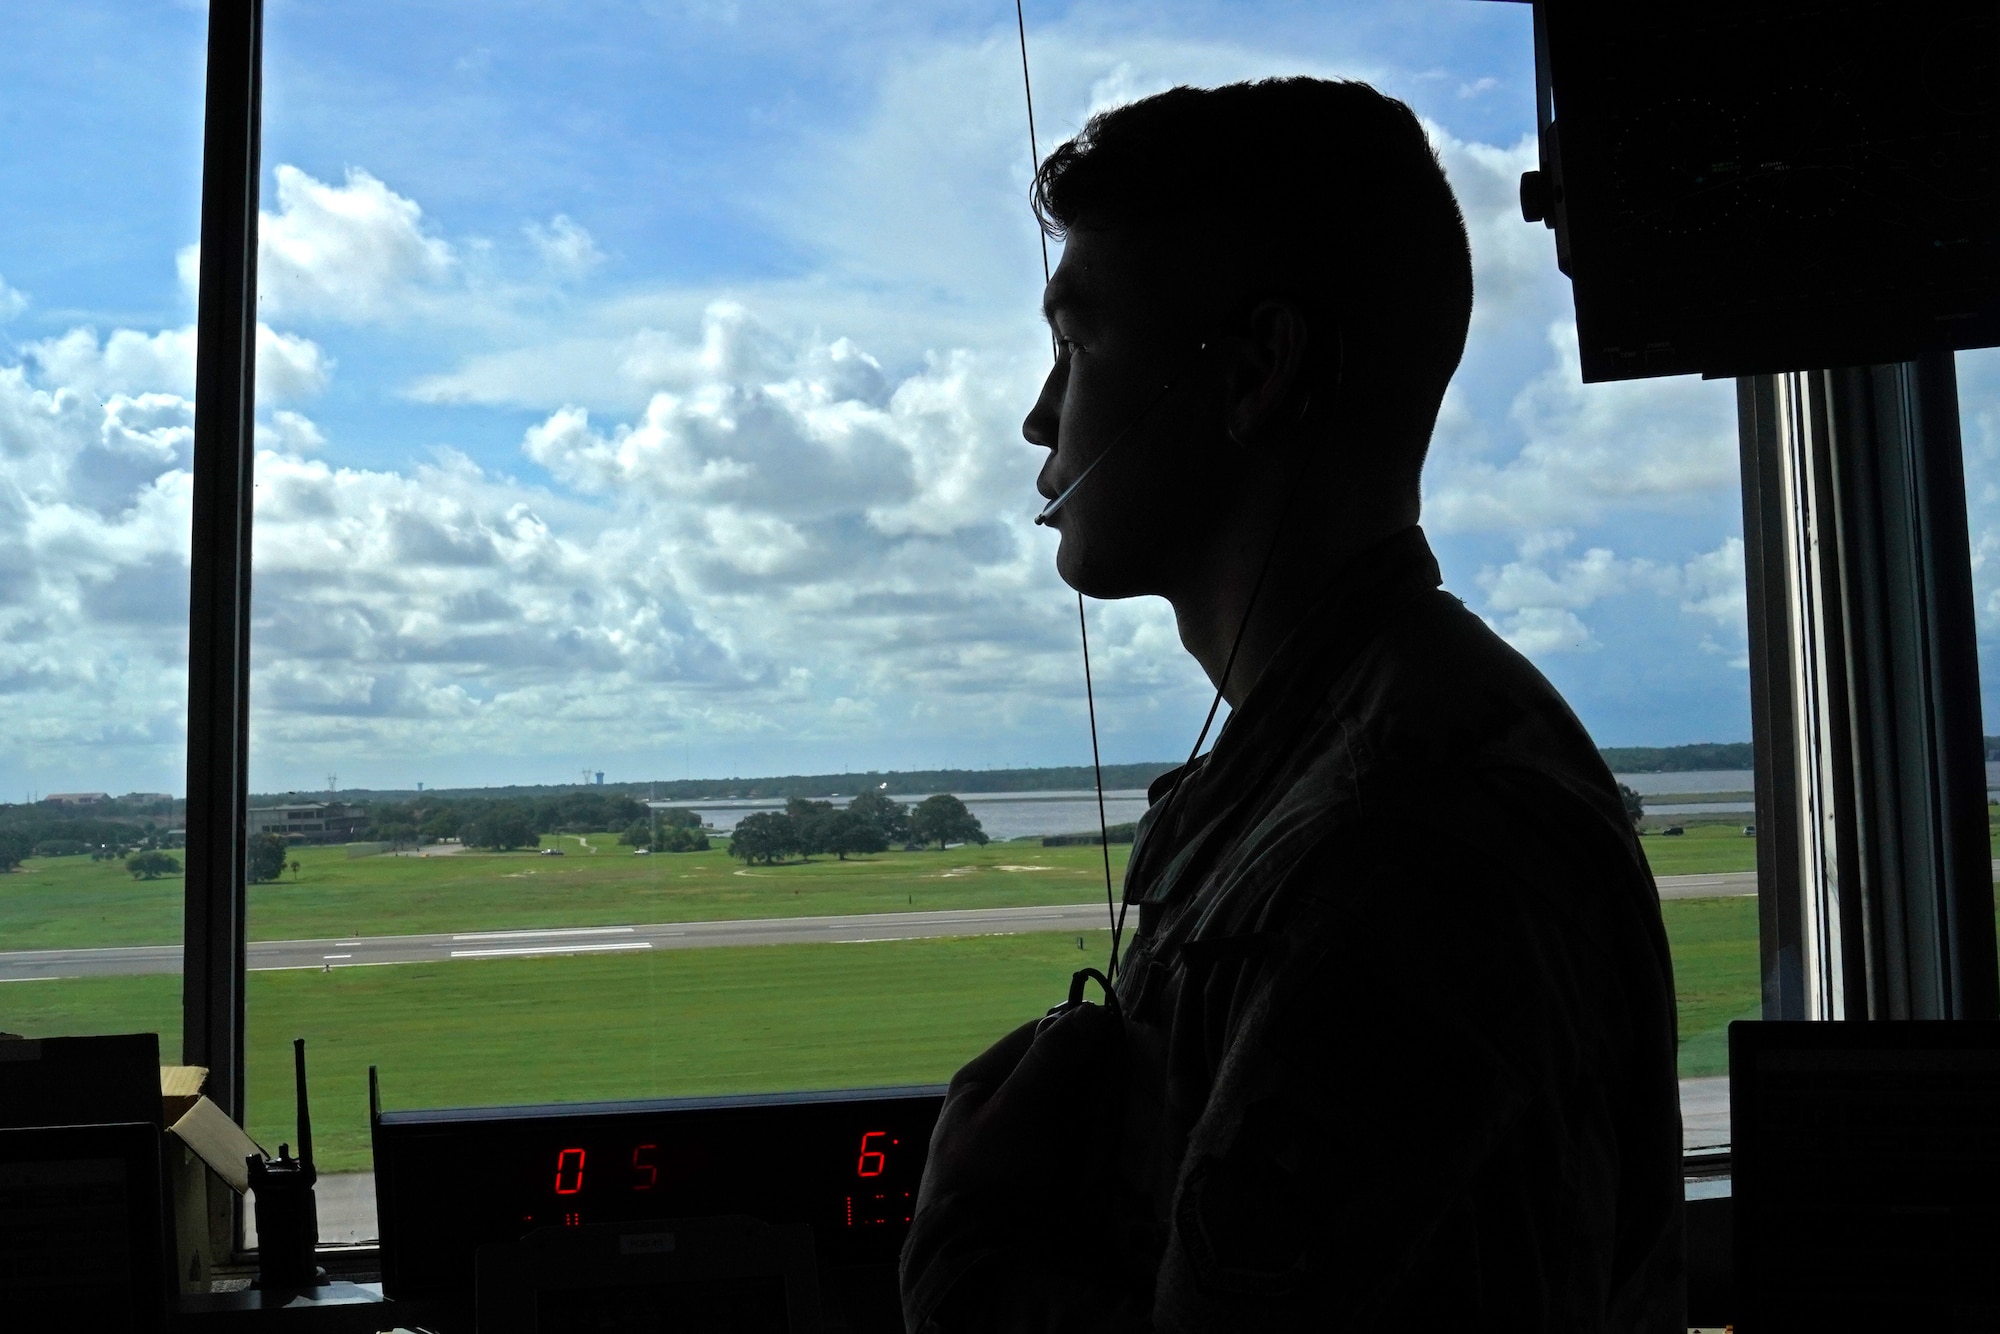 U.S. Air Force Airman 1st Class Jacob Penny, 81st Training Wing air traffic controller, poses for a photo inside the Keesler Air Traffic Control tower at Keesler Air Force Base, Mississippi, June 25, 2021. The 81st TRW Operations Support Flight traffics the aircraft on the Keesler flightline and the local airspace. (U.S. Air Force photo by Senior Airman Seth Haddix)